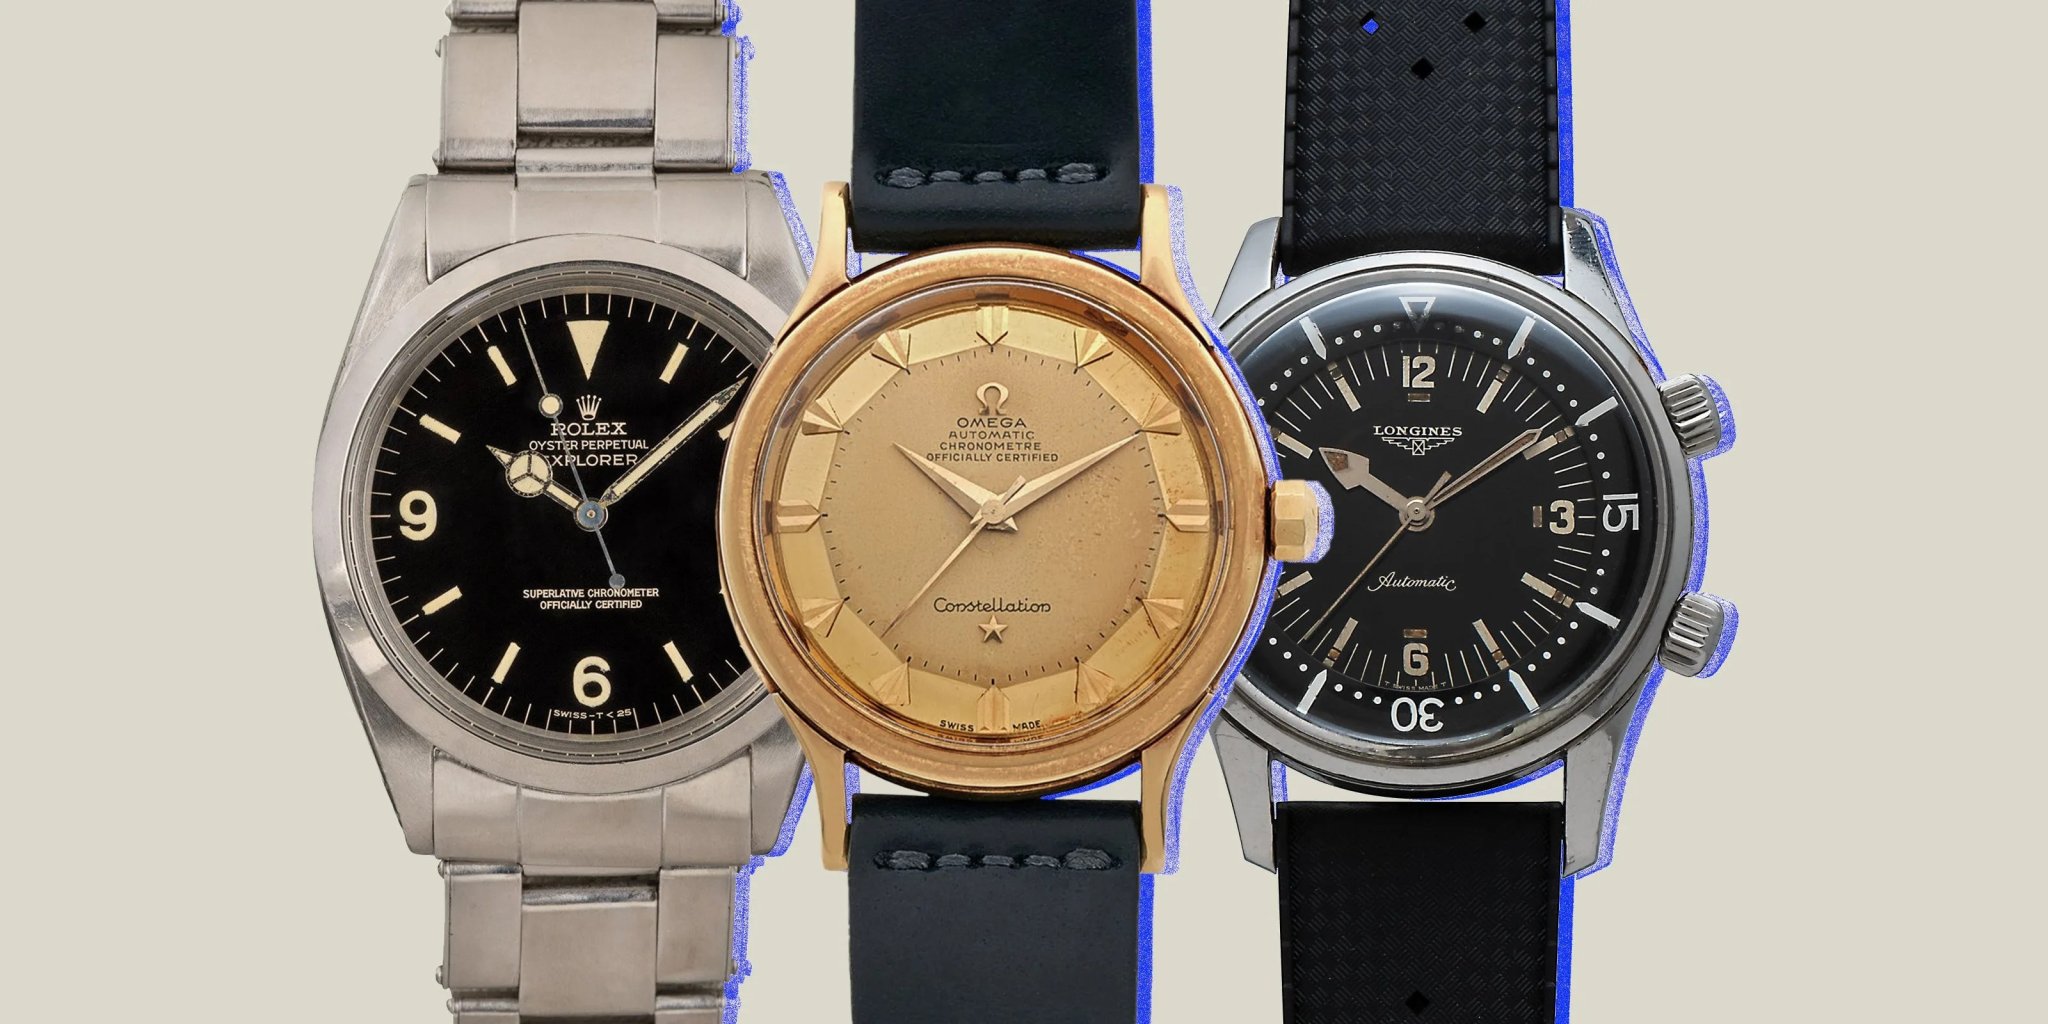 Watch History: 1950s Timepieces Every Collector Should Know